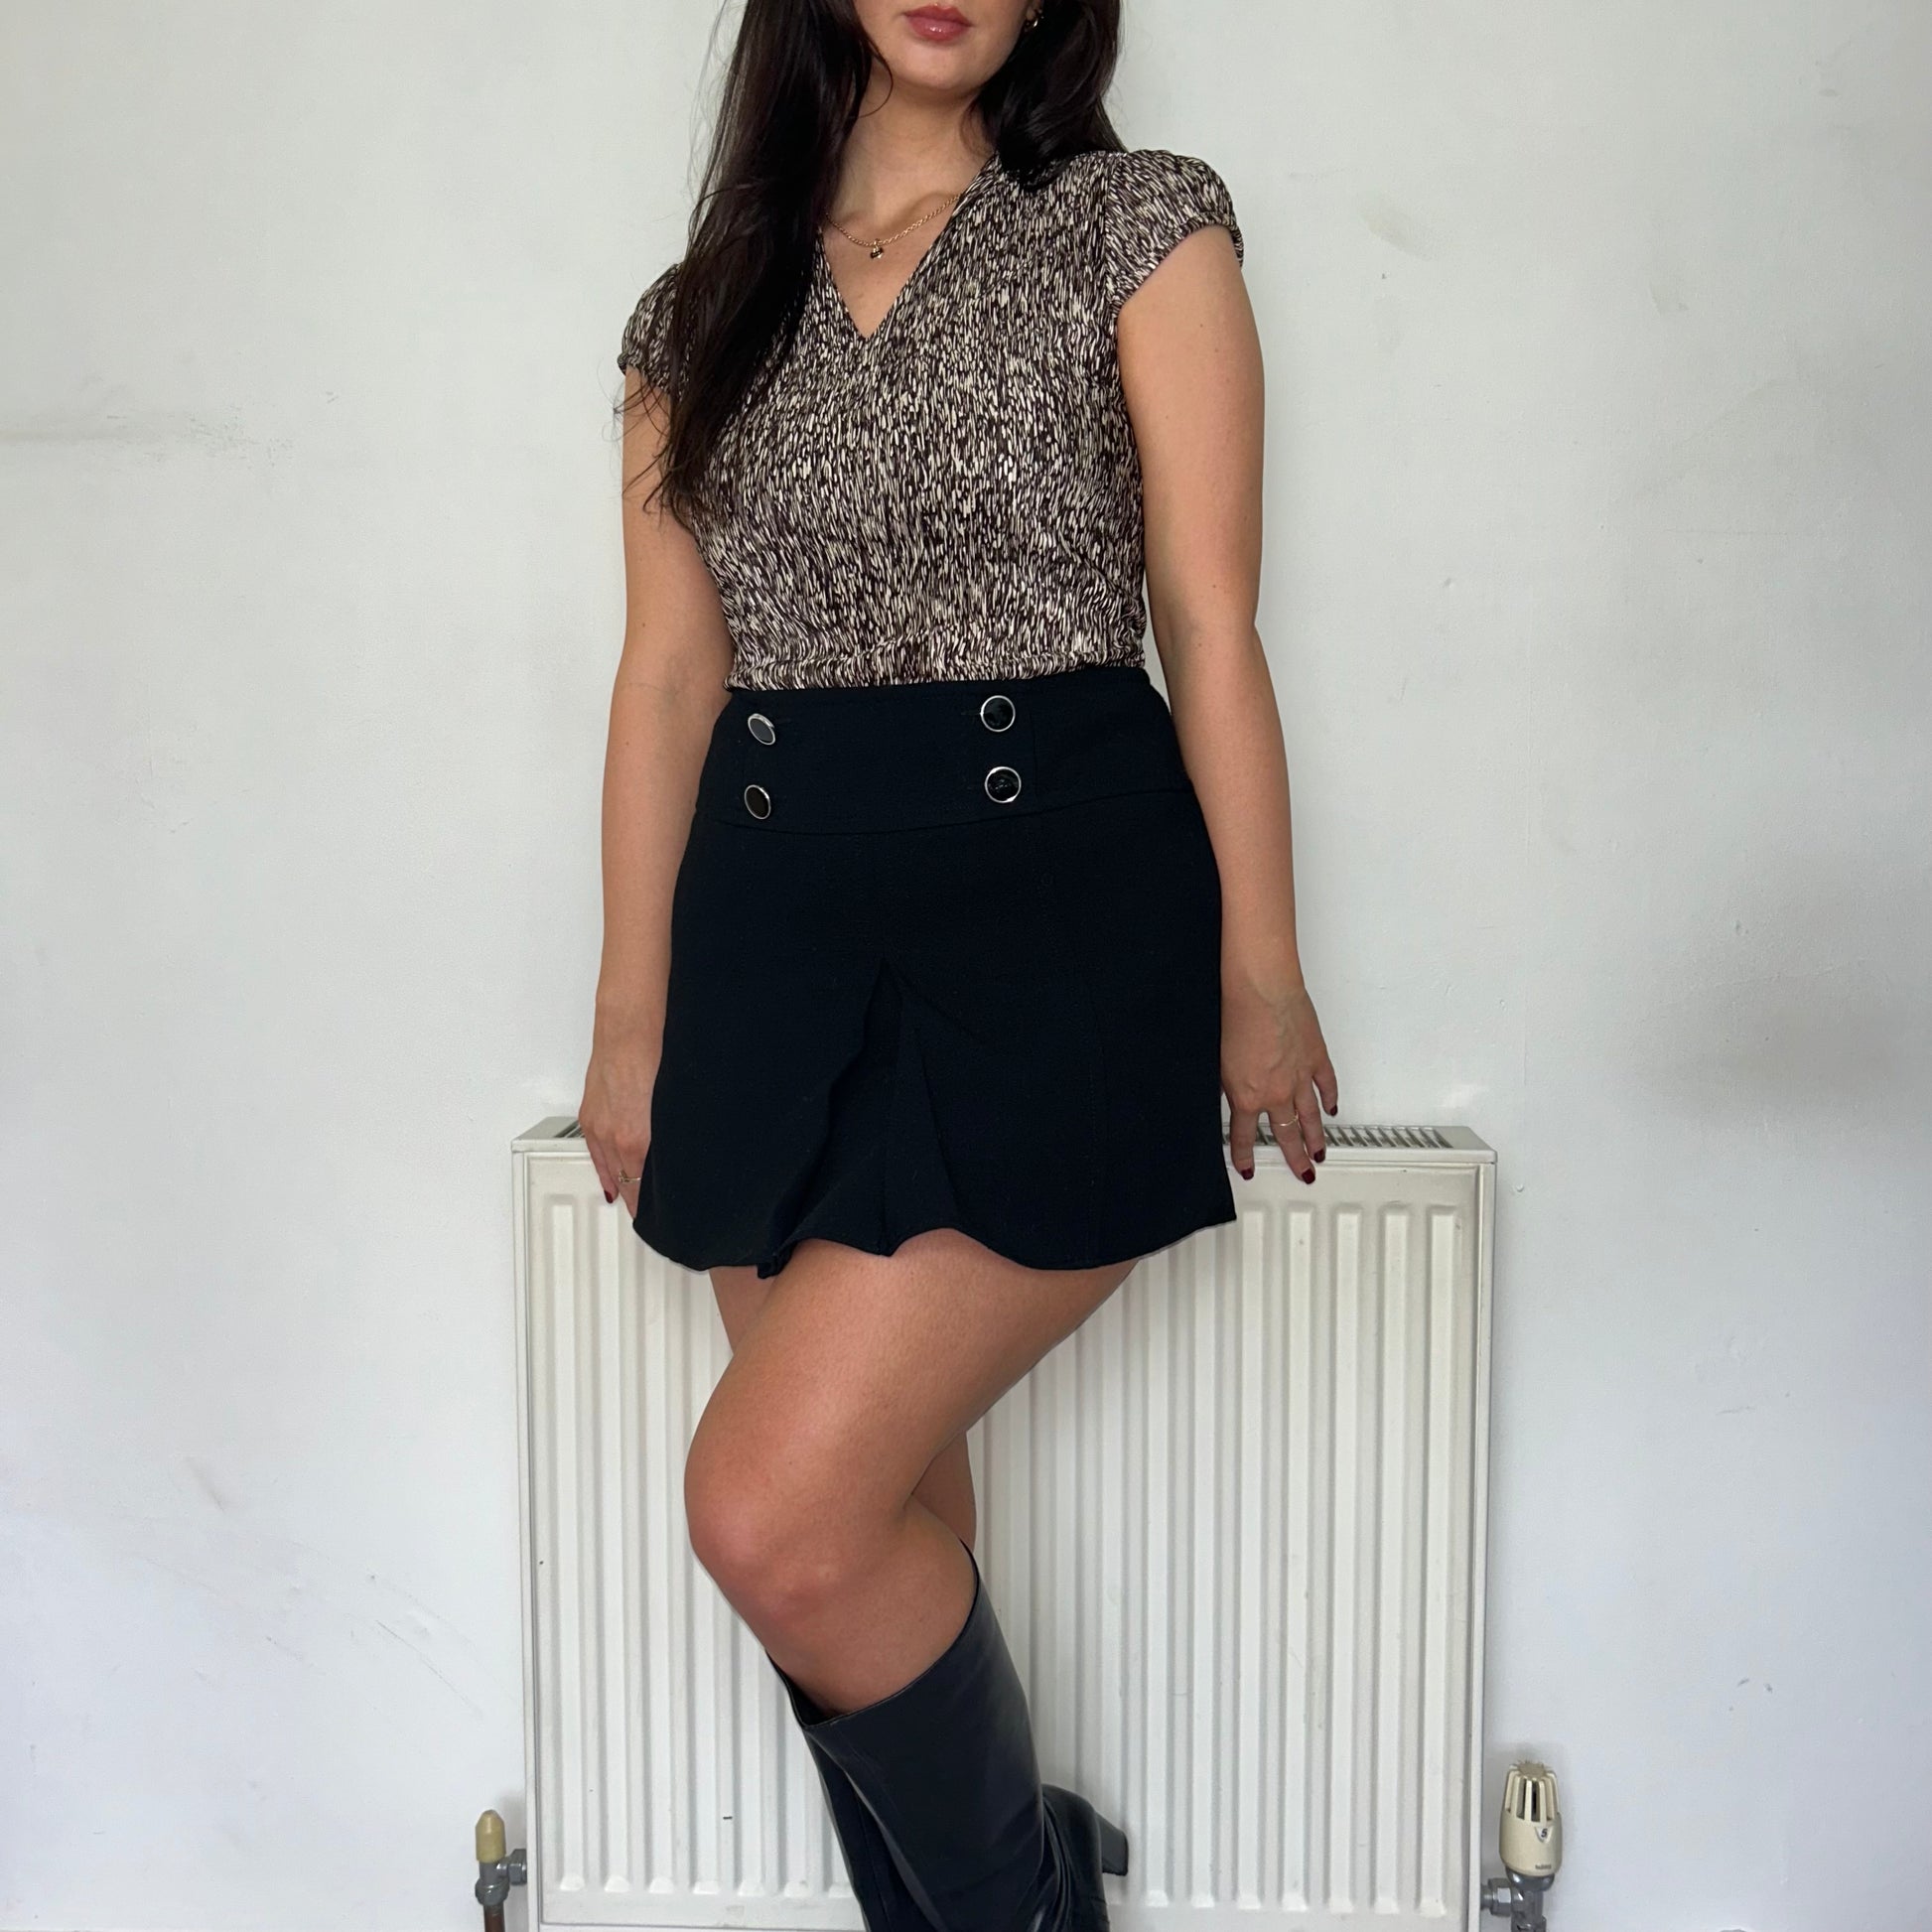 brown and beige short sleeve blouse shown on a model wearing a black mini skirt and black boots